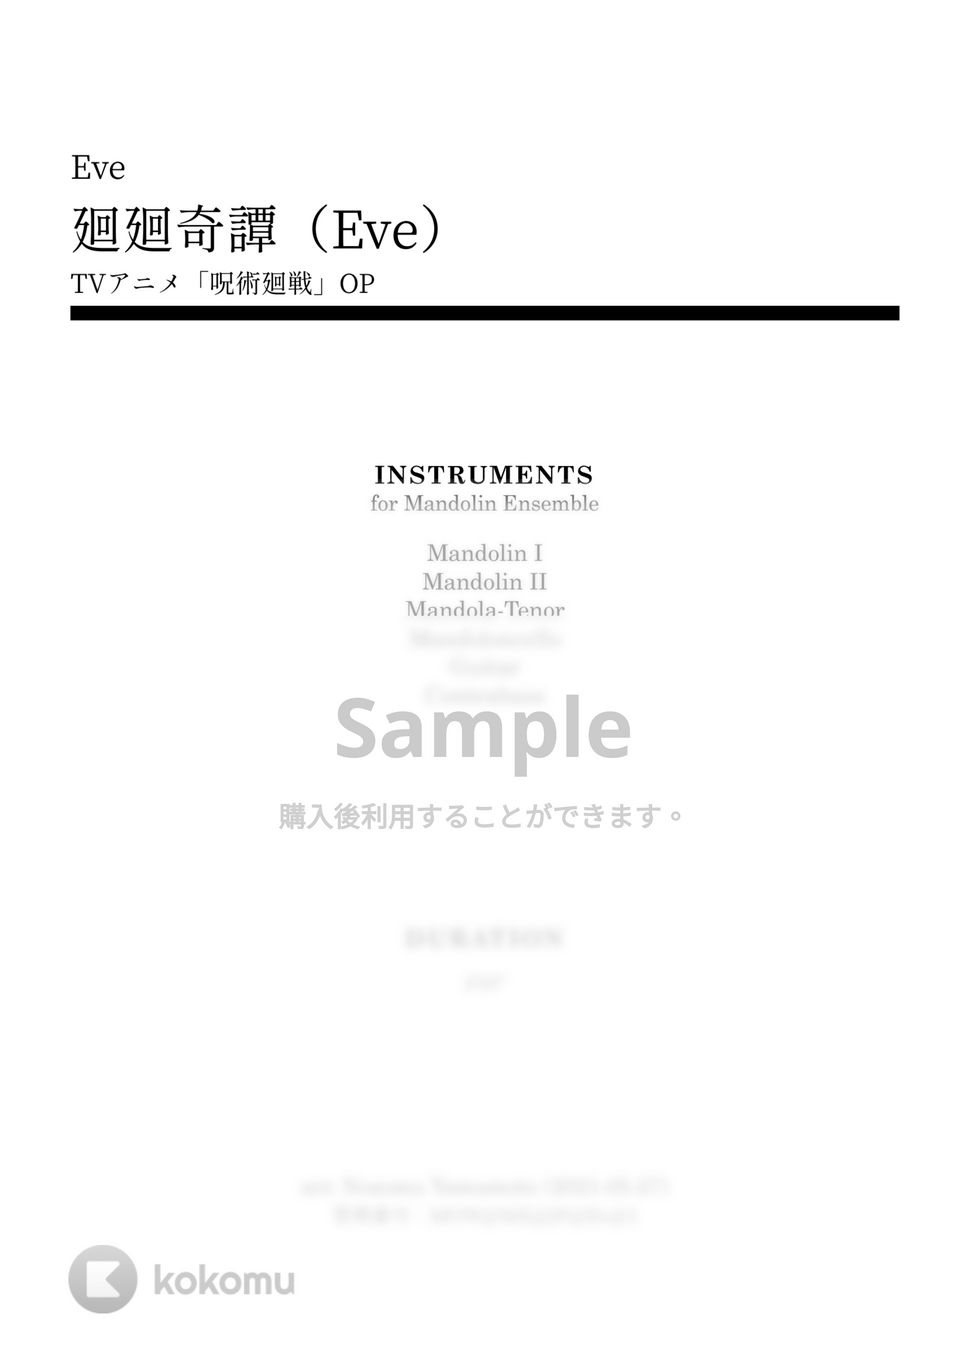 Eve - 廻廻奇譚 by MOW